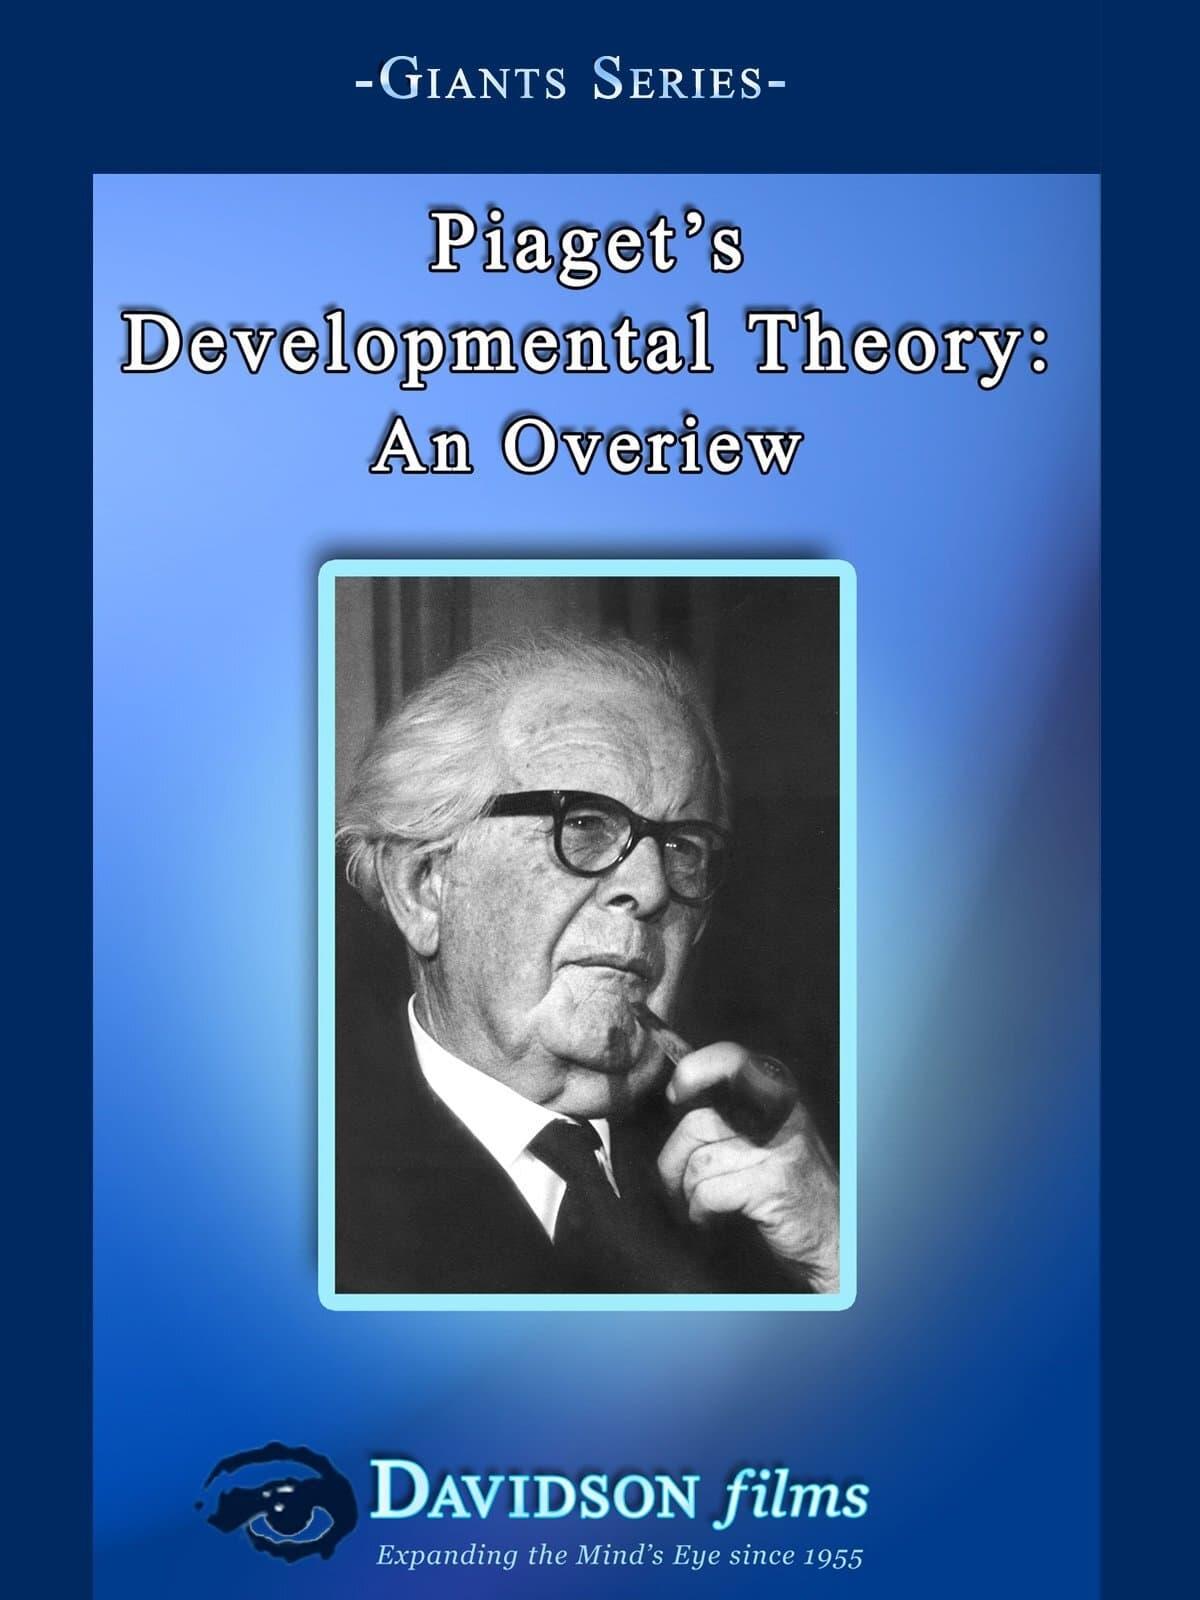 Piaget’s Developmental Theory: an Overview poster